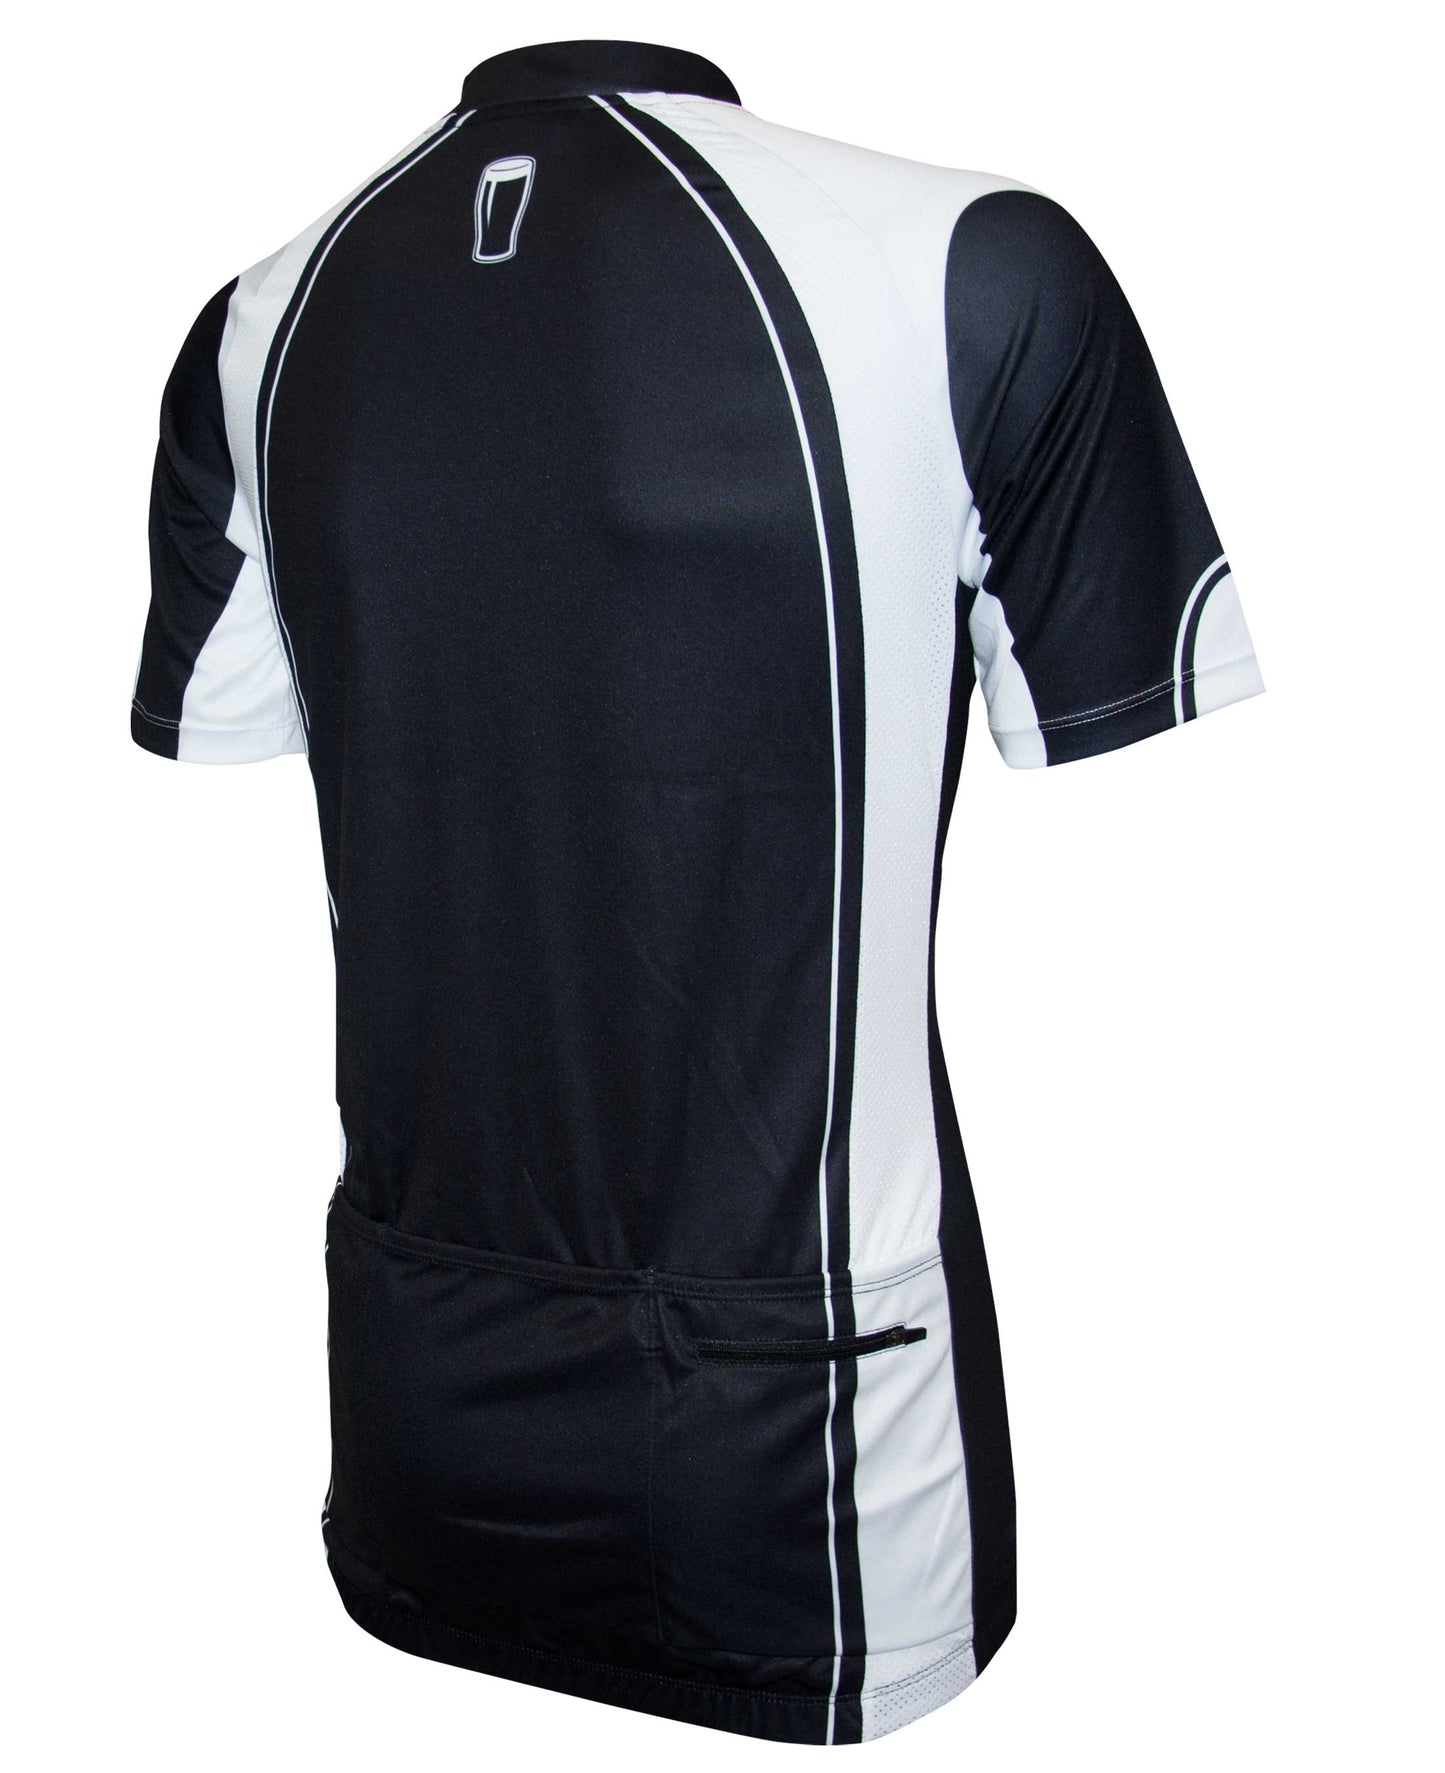 The back view of a Guinness UK men's race cut black and white cycling jersey.